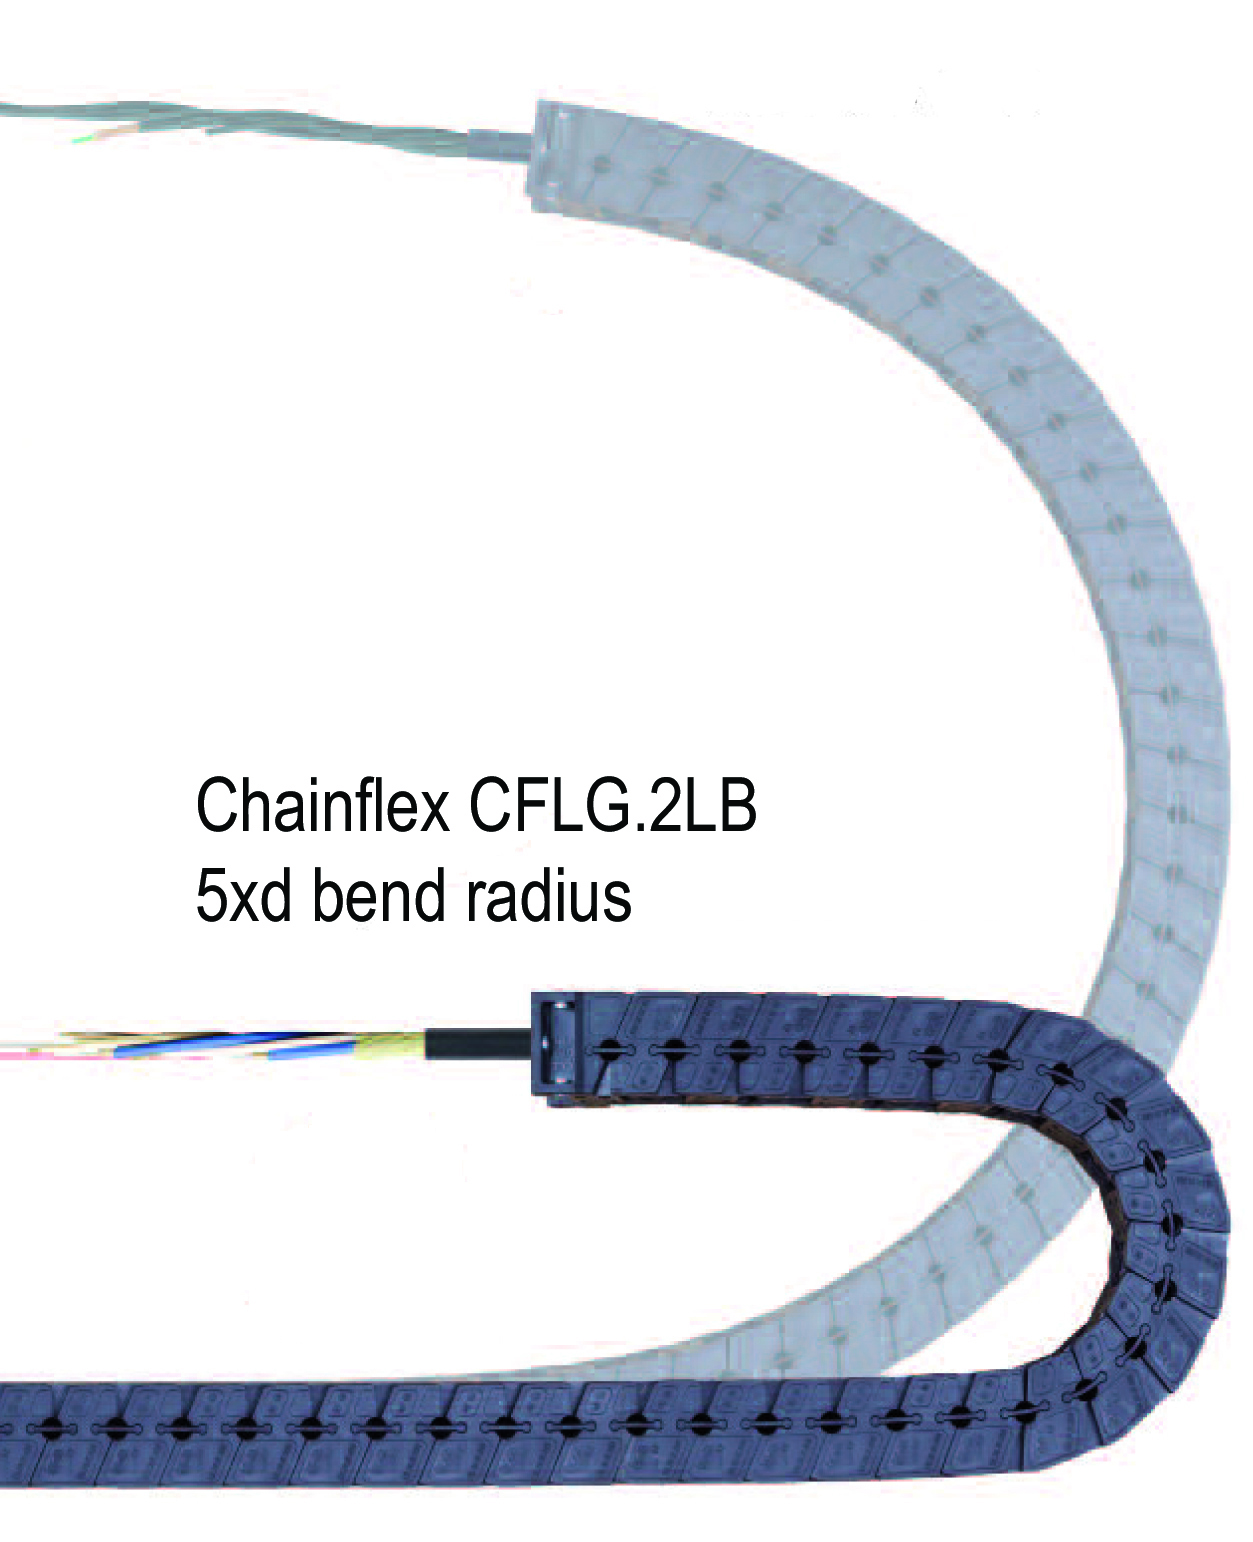 The new igus fibre optic cable, called Chainflex CFLG.2LB, allows high cycle numbers at a minimum bending radius of 5xd in an energy chain. 